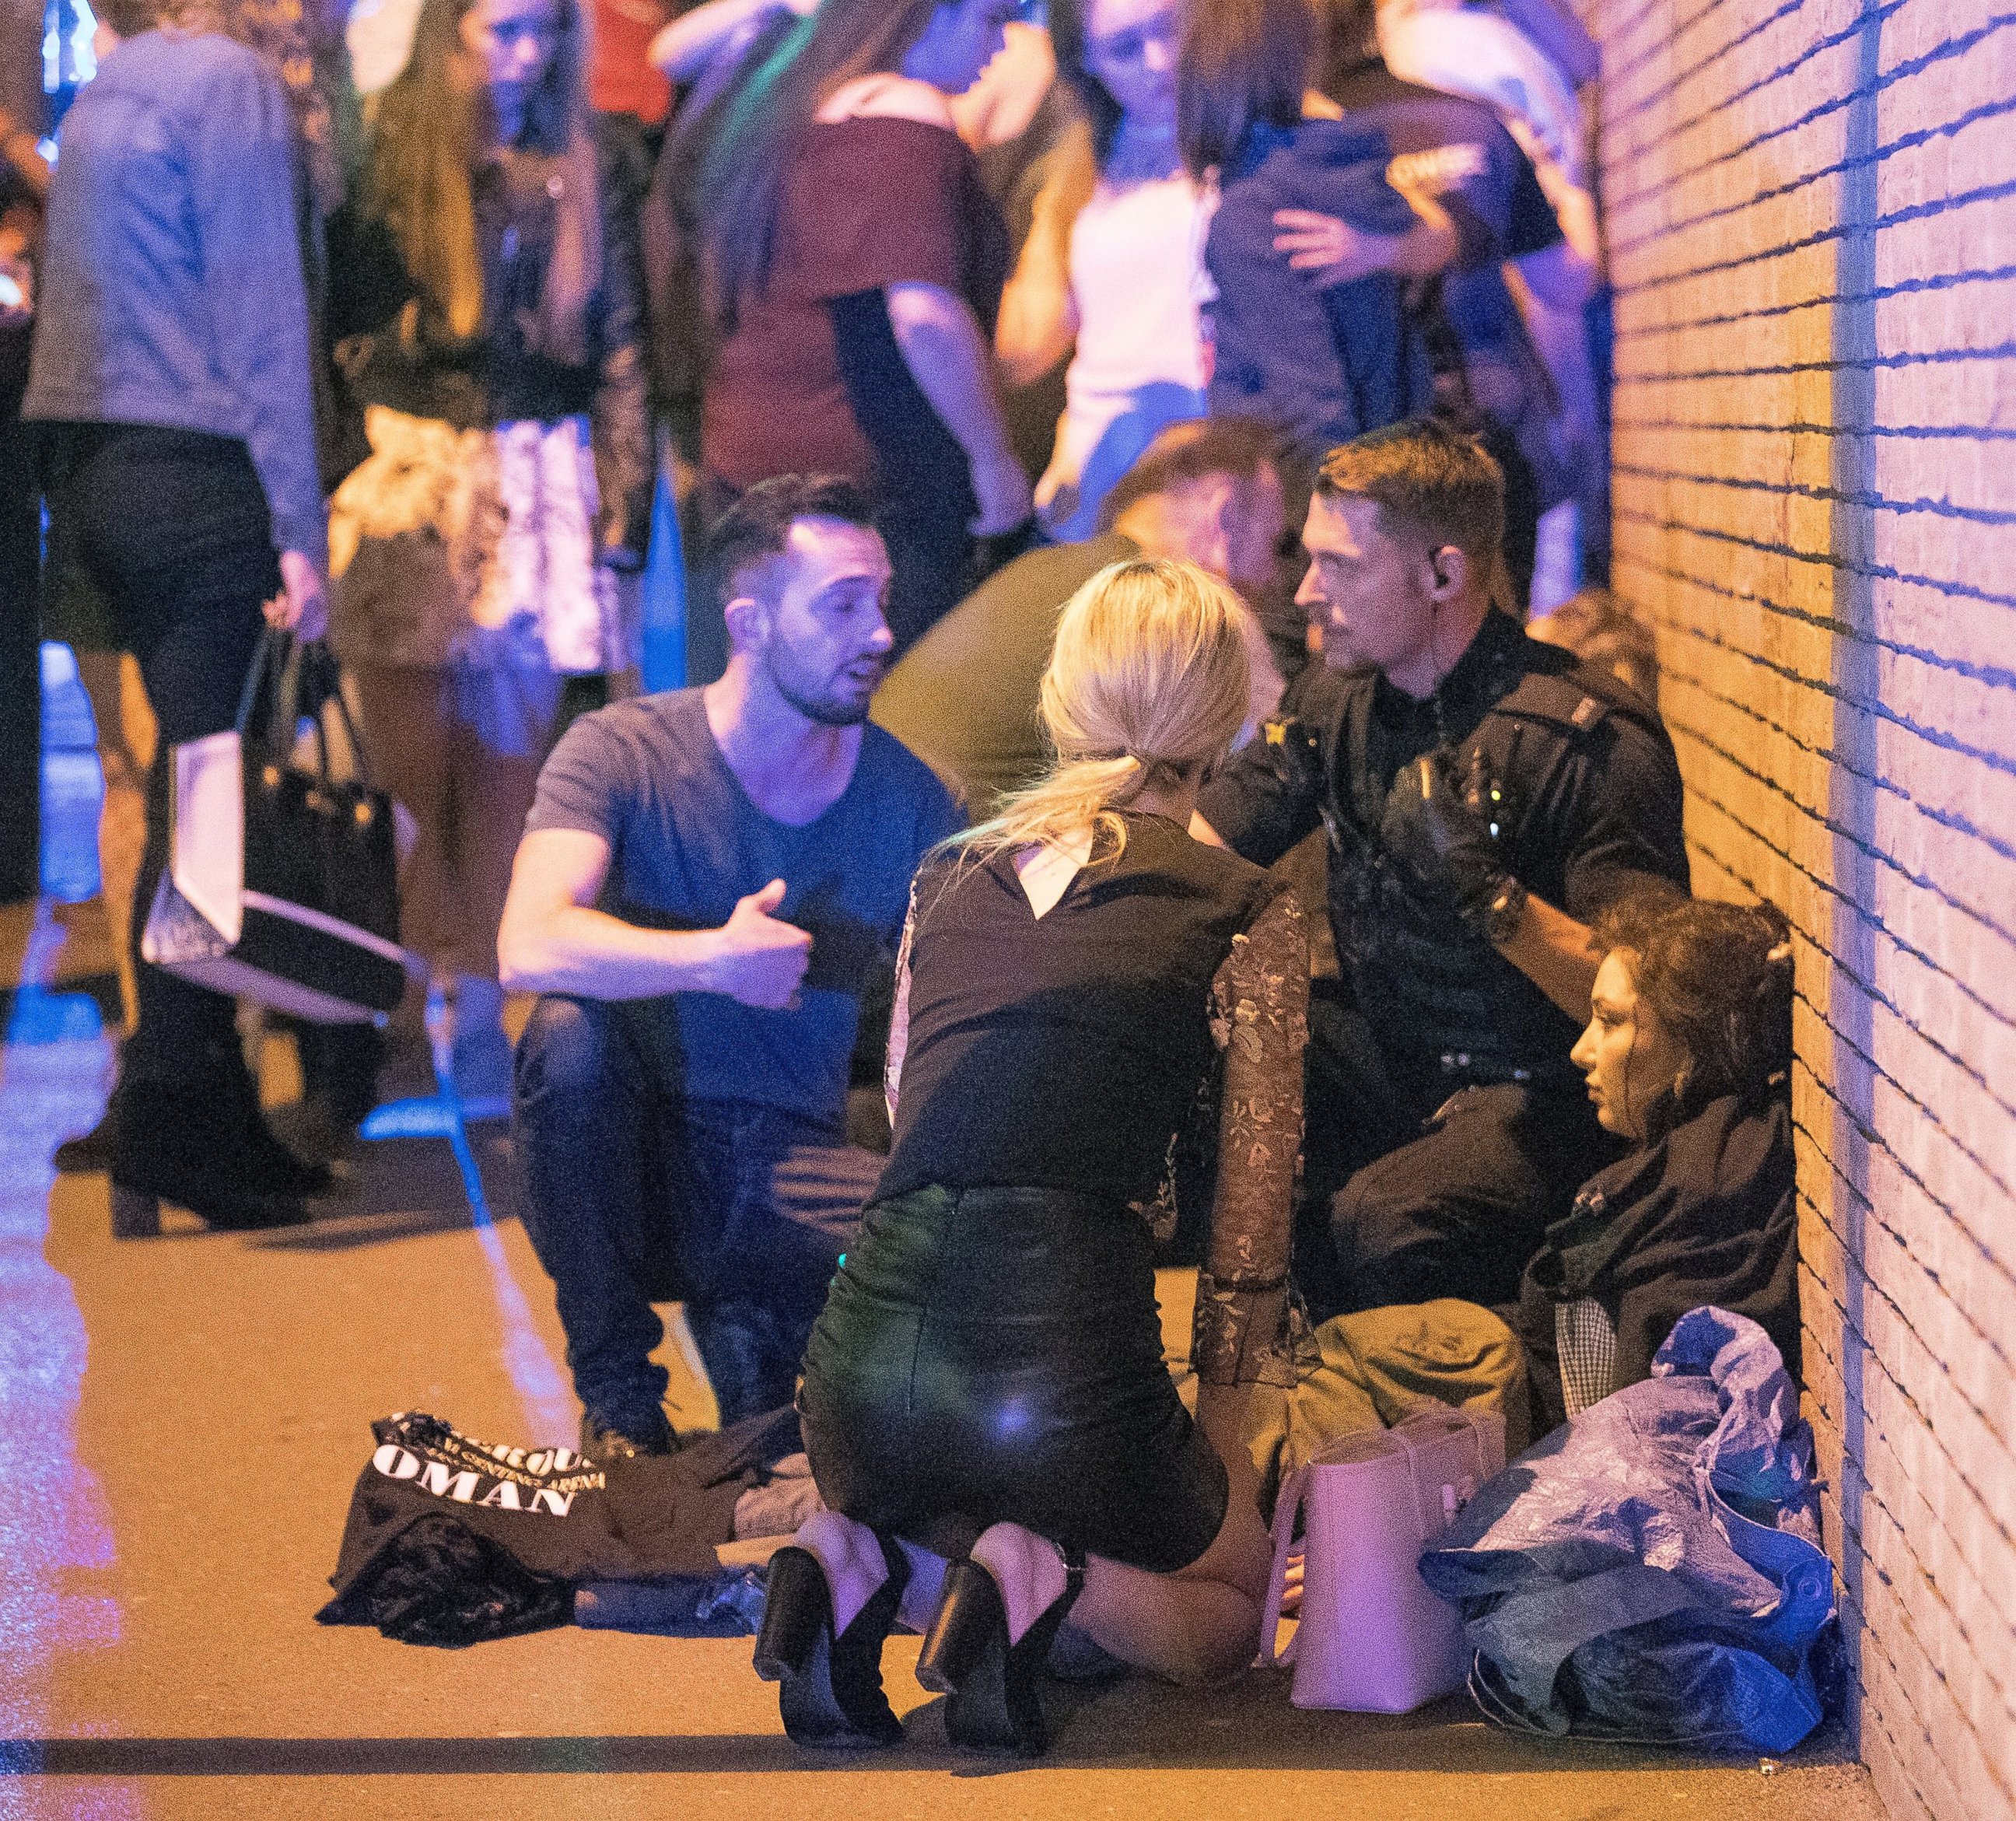 PHOTO: People gather near the Manchester Arena after reports of an explosion on May 22, 2017 in Manchester, England.